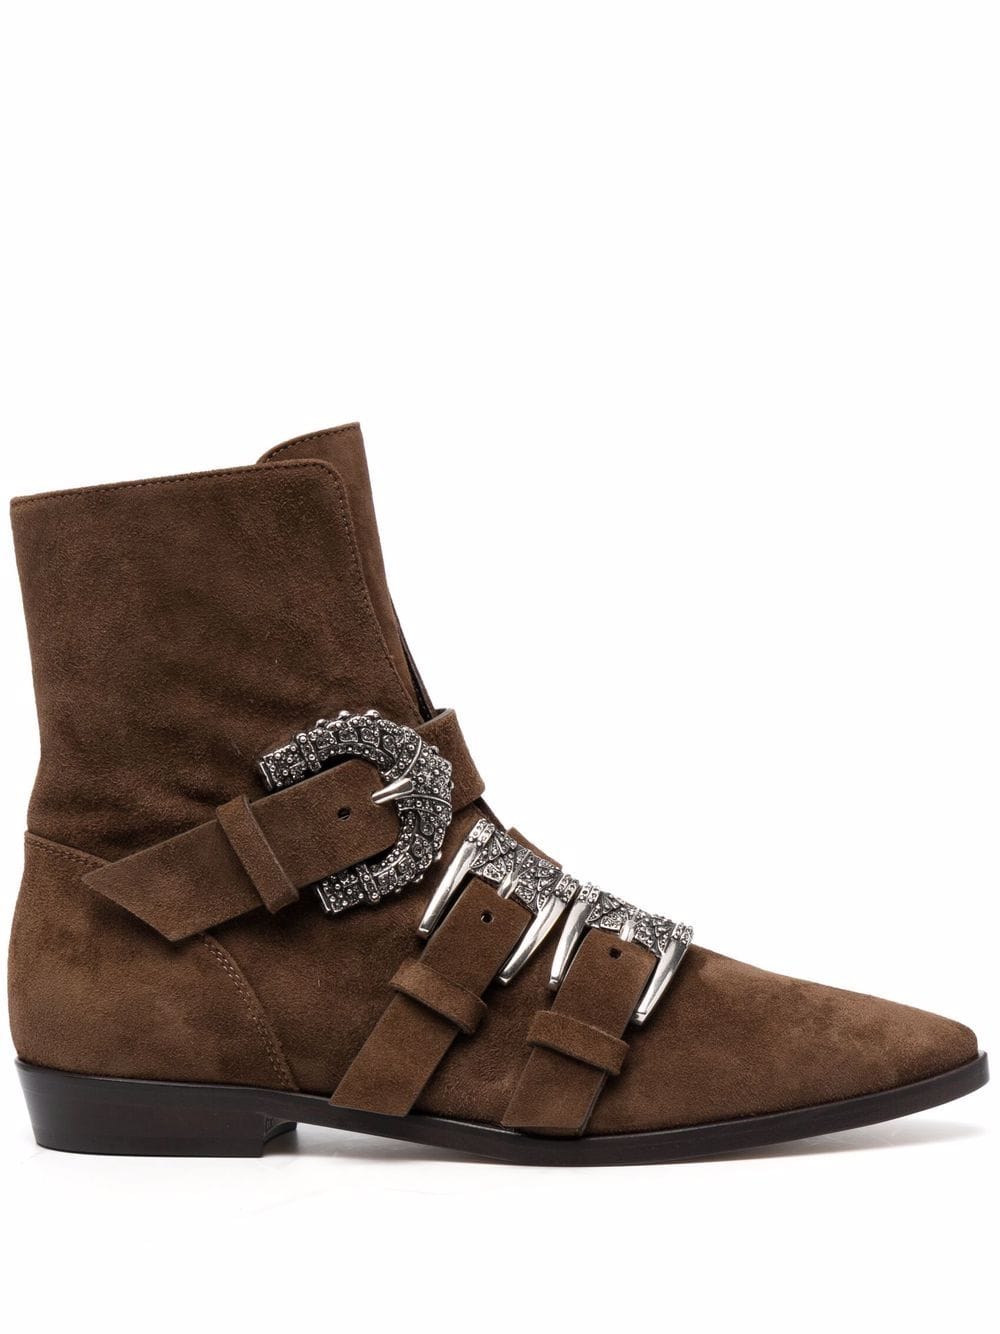 Etro Brown Suede Ankle Boot With Jewel Buckles Woman